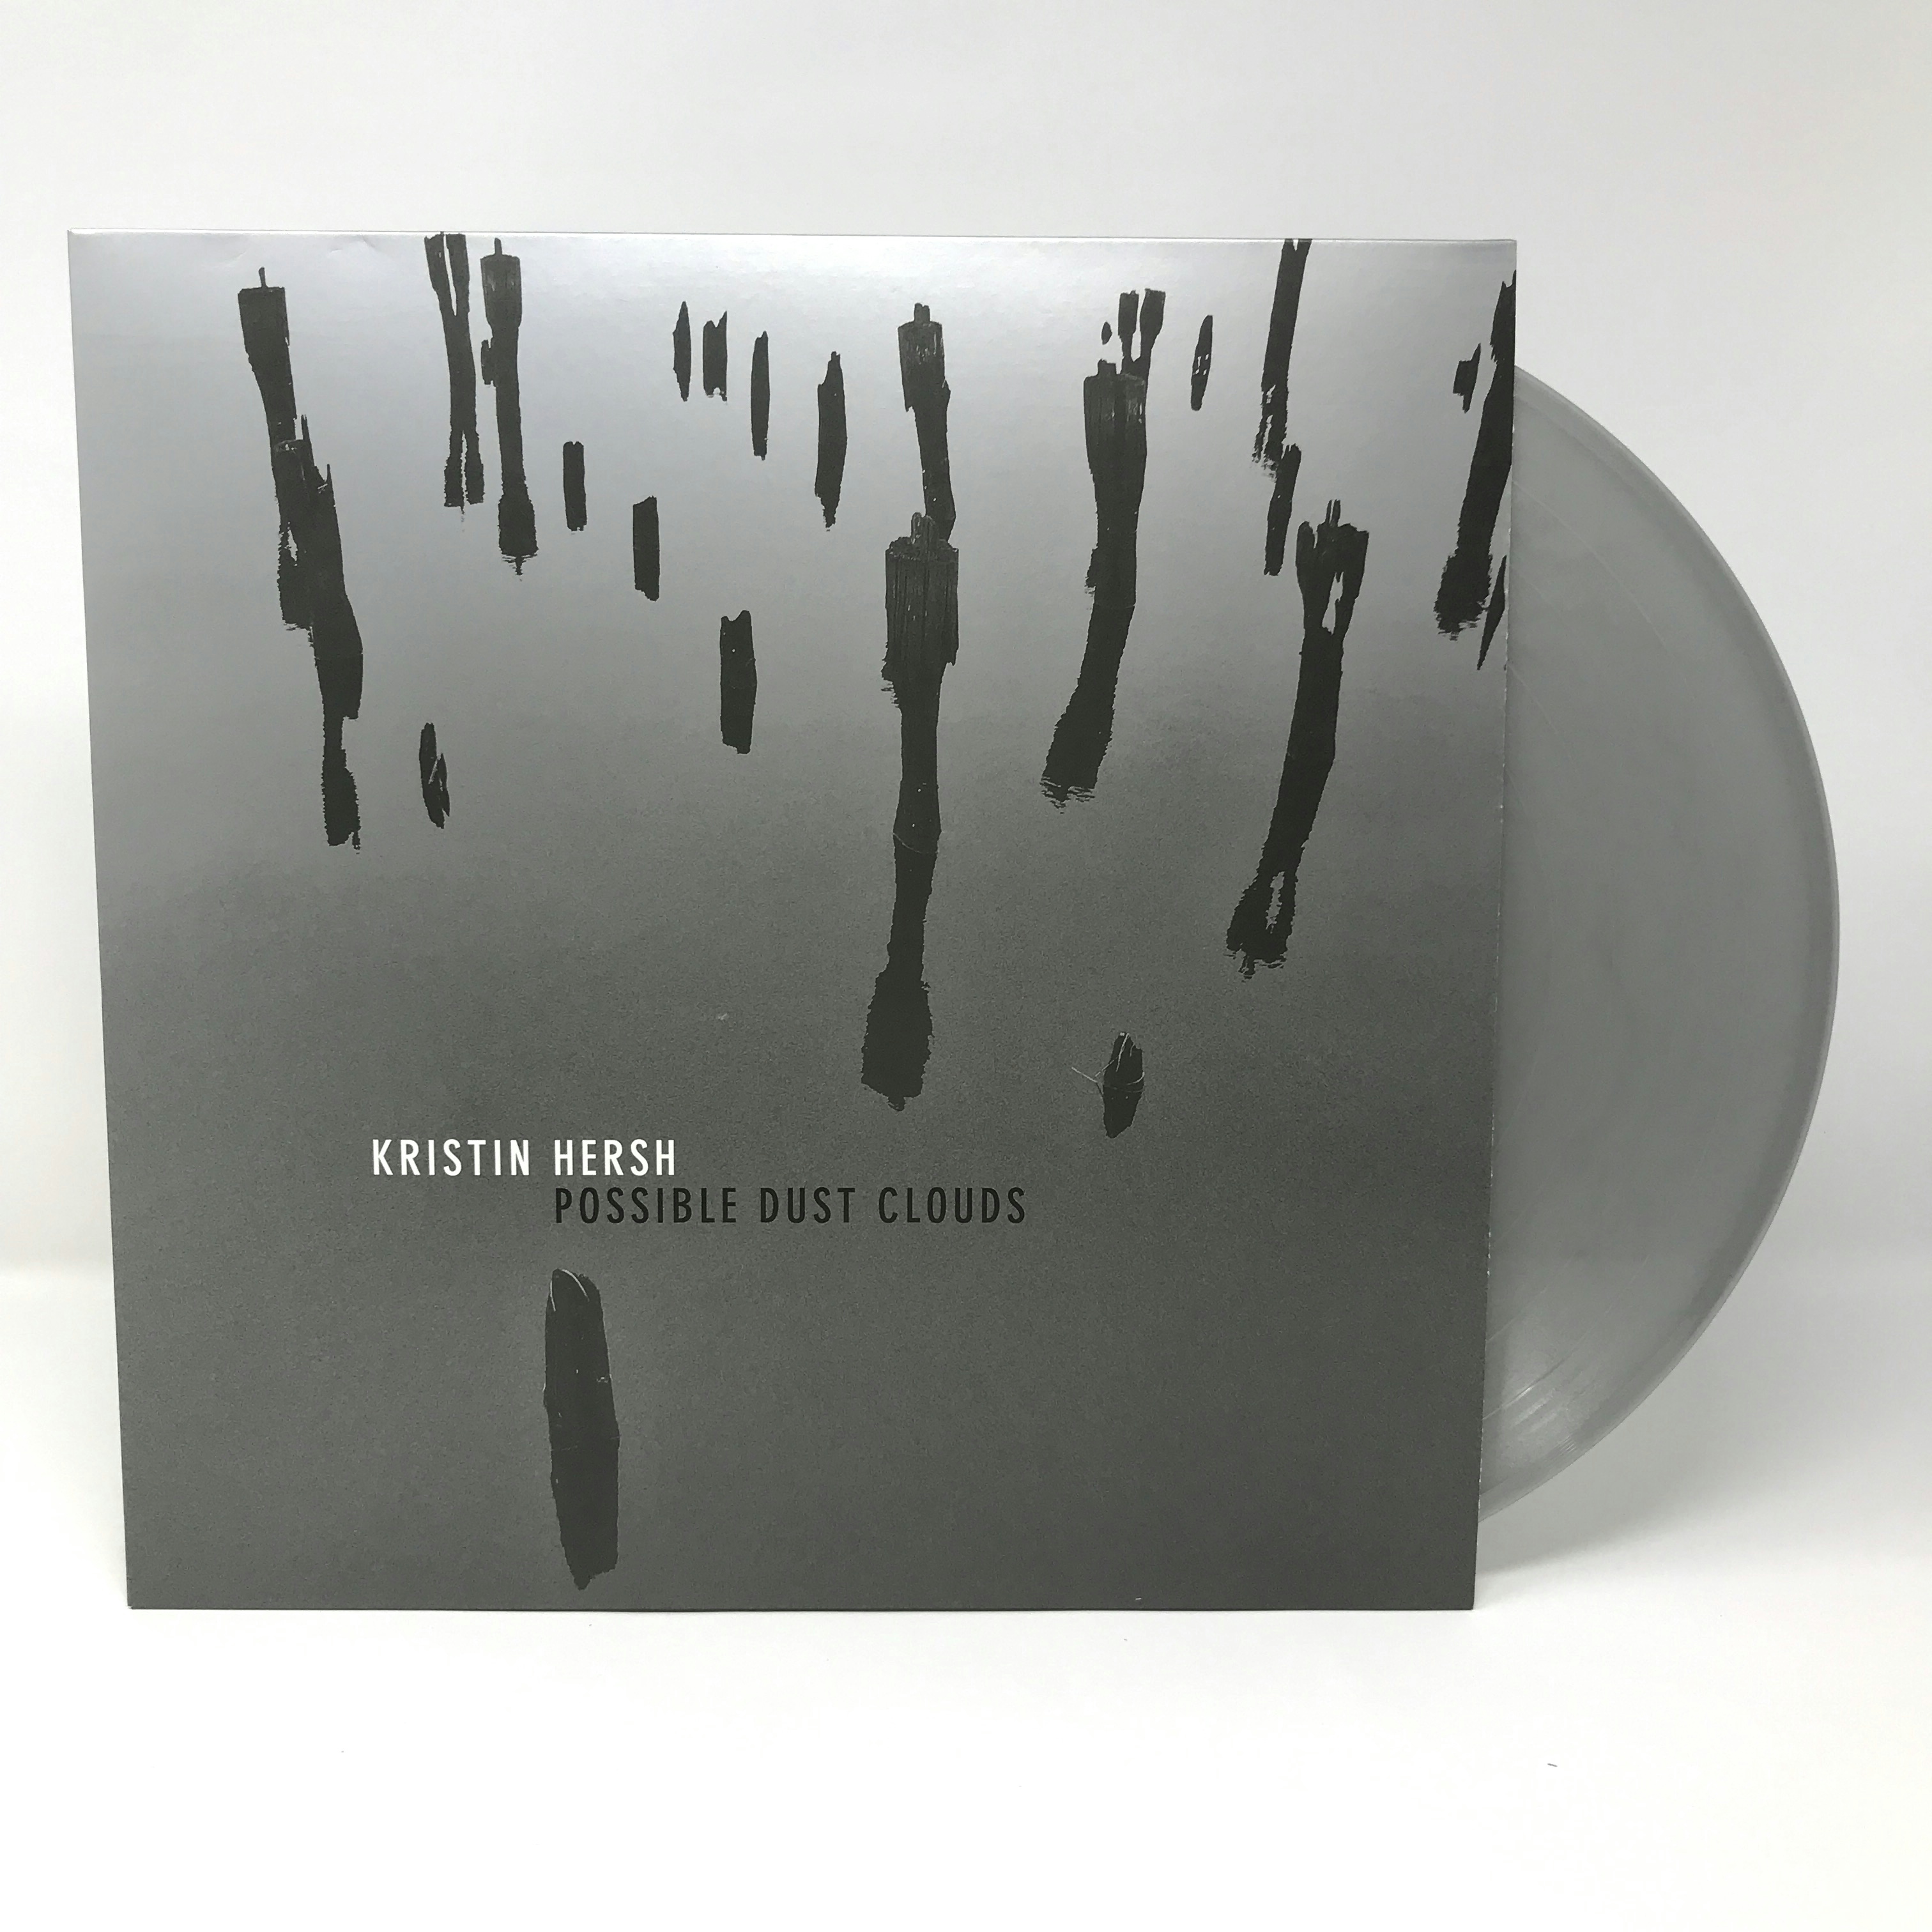 Album artwork for Possible Dust Clouds by Kristin Hersh